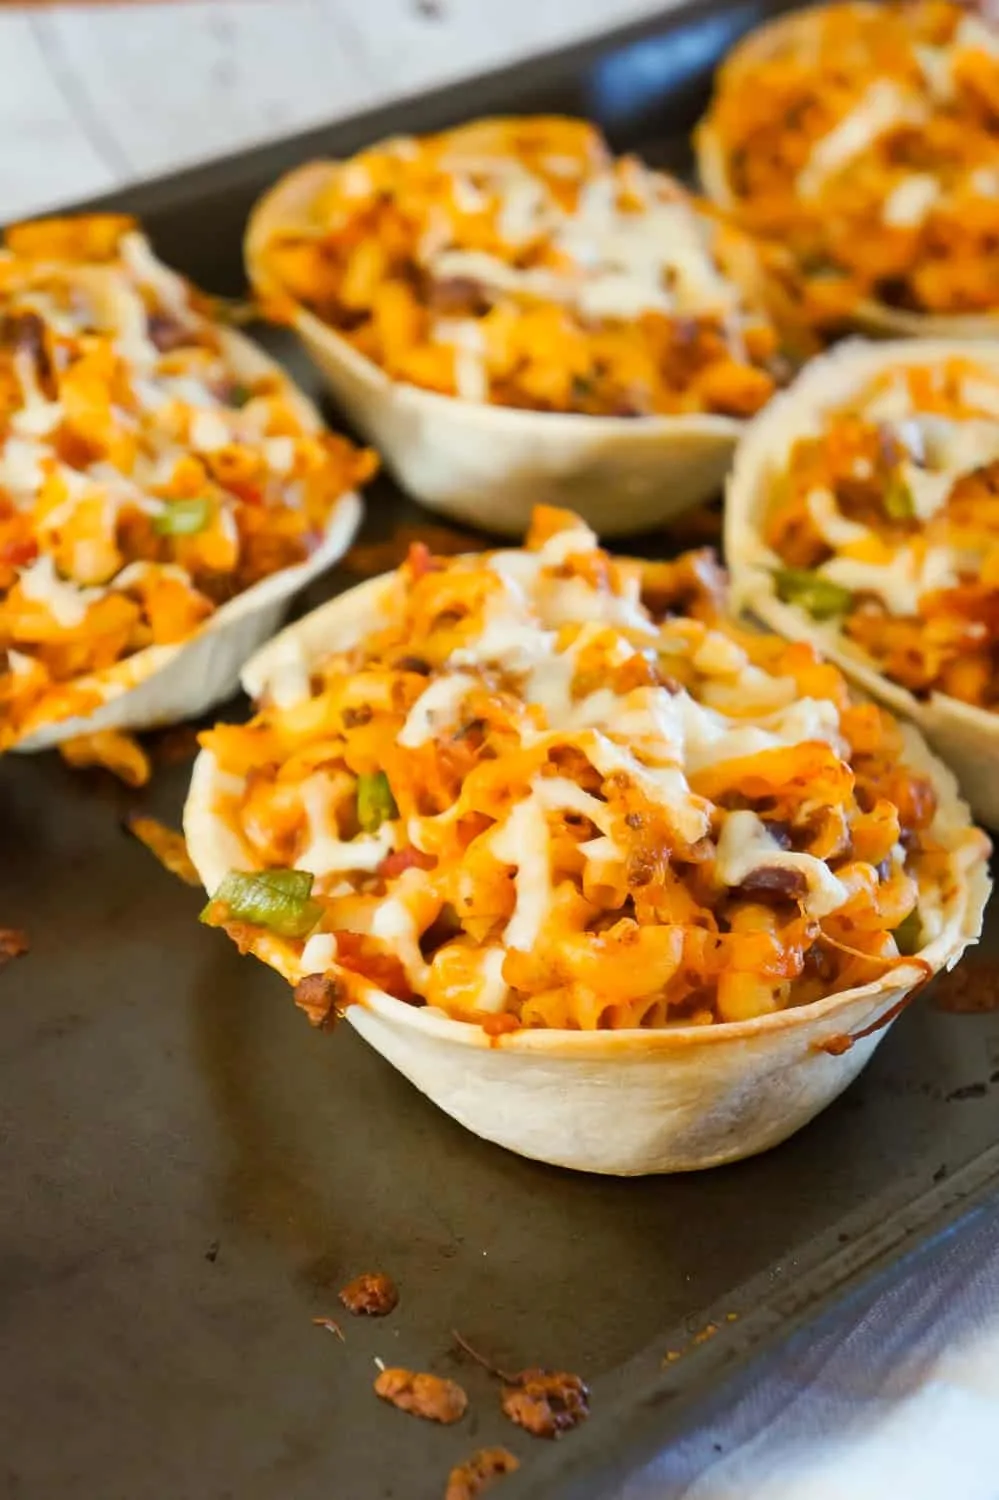 Taco Pasta is an easy ground beef dinner recipe that is fun and kid friendly. This cheesy macaroni tossed in salsa and taco sauce is baked in Old El Paso Tortilla Bowls.